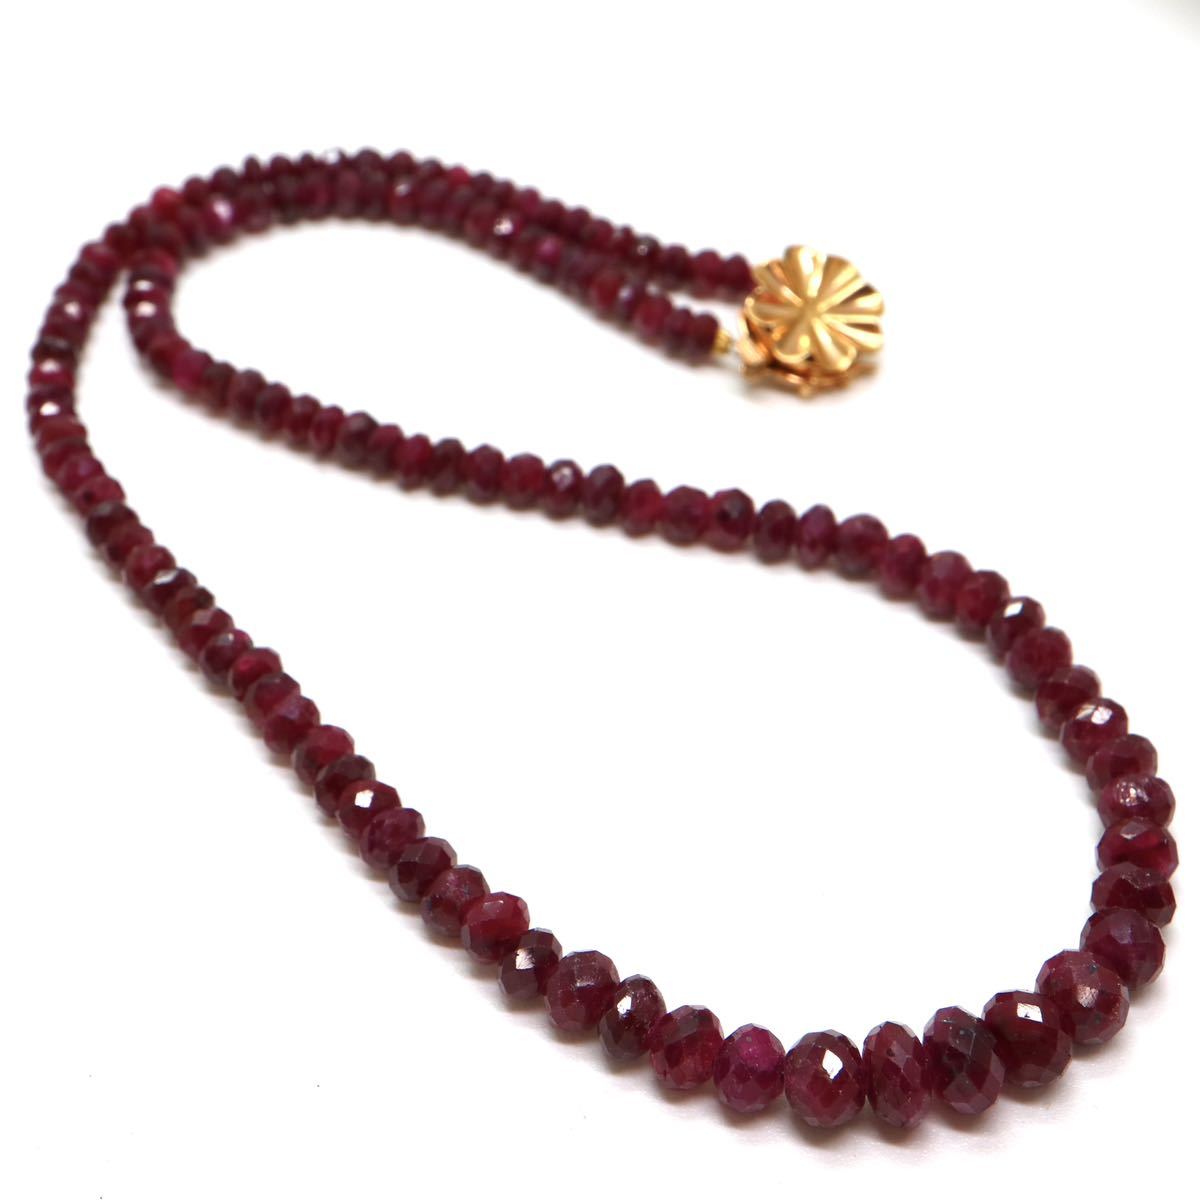 《K14天然ルビーネックレス》J ◎18.0g 5 39.5cm ruby necklaceジュエリー jewelry EA0/EA0_画像5